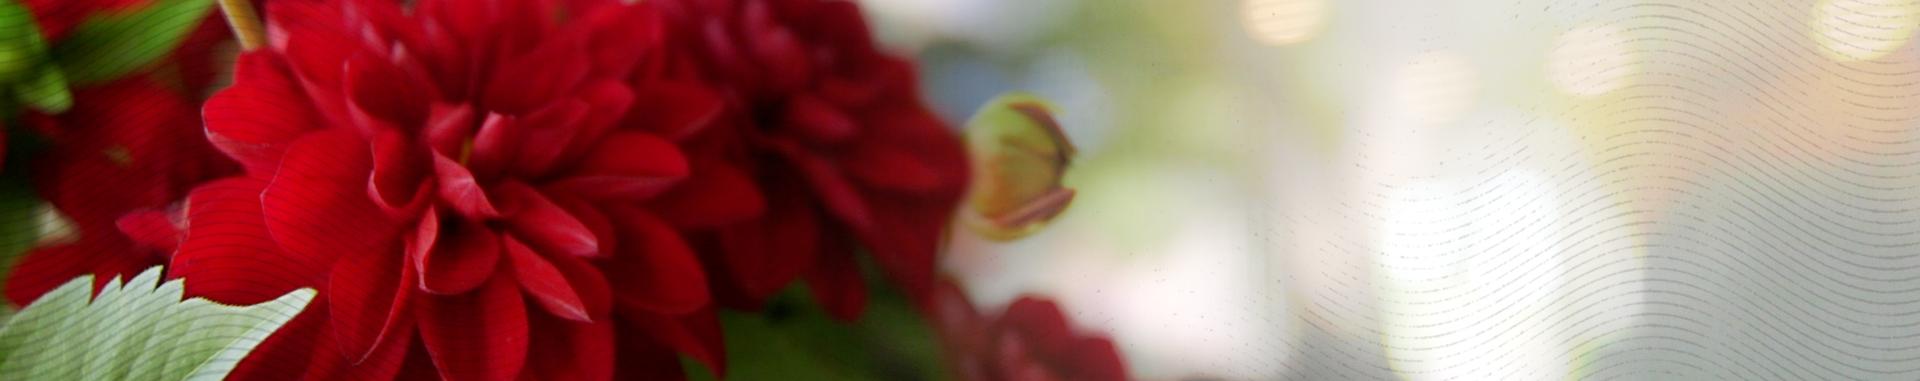 Panoramic color closeup image of a red geranium flower, a still from a Co-op Credit Union video